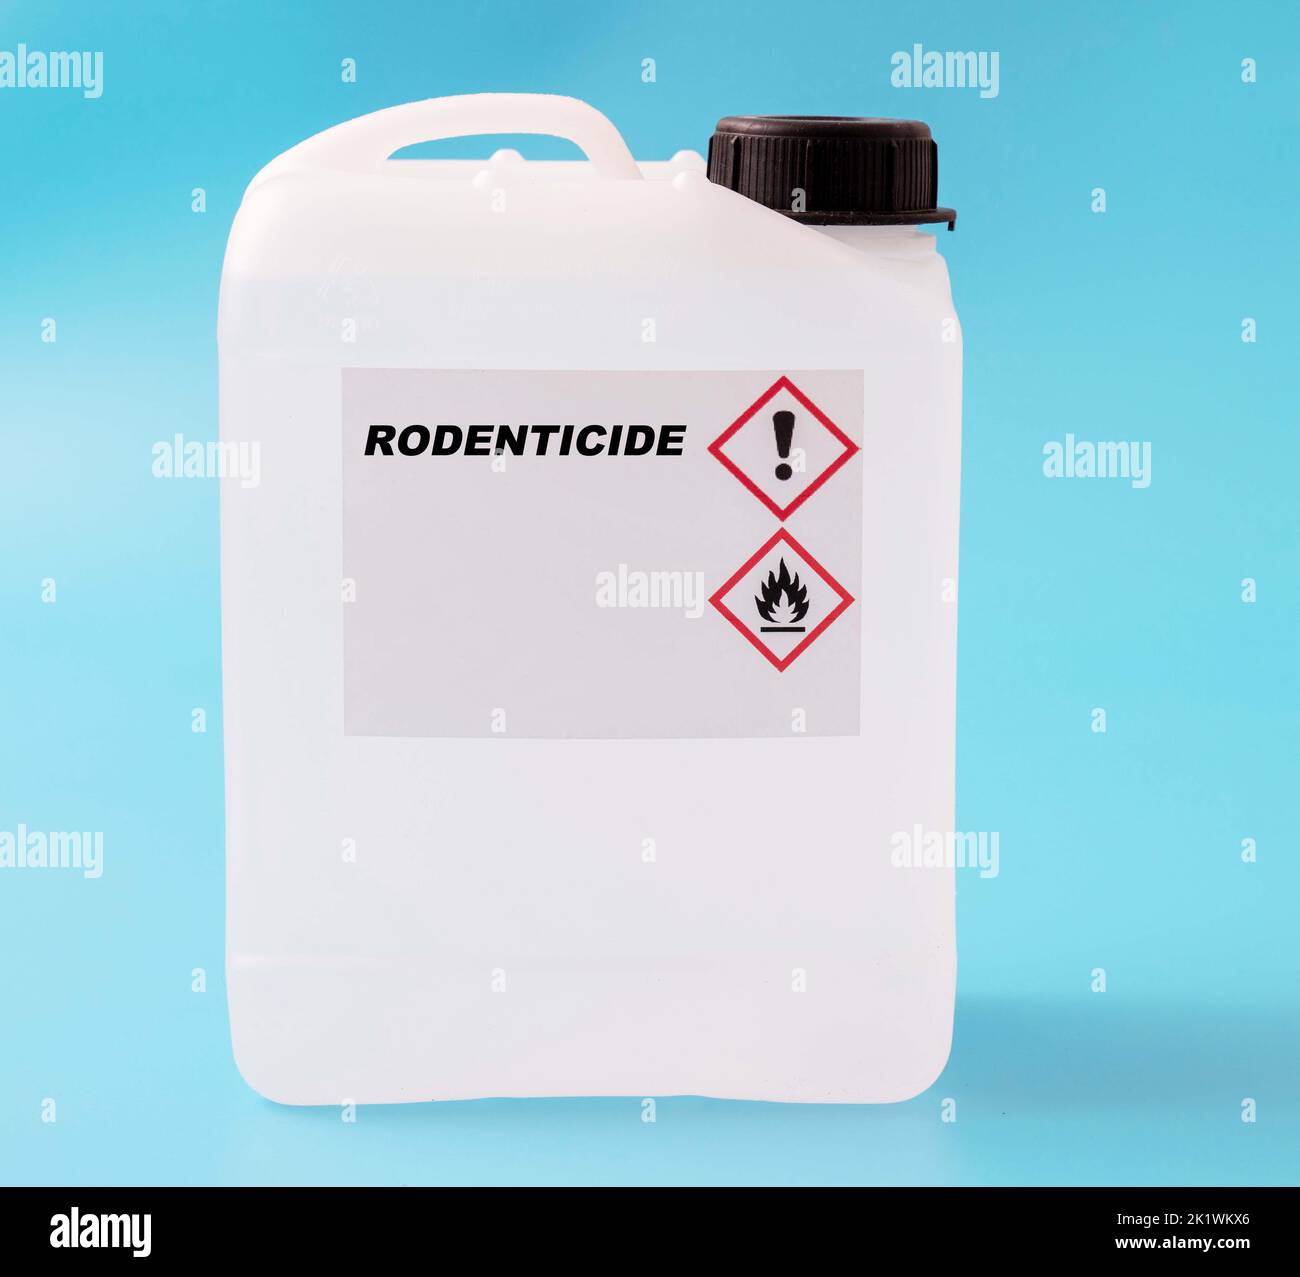 Rodenticide in a plastic canister, conceptual image Stock Photo